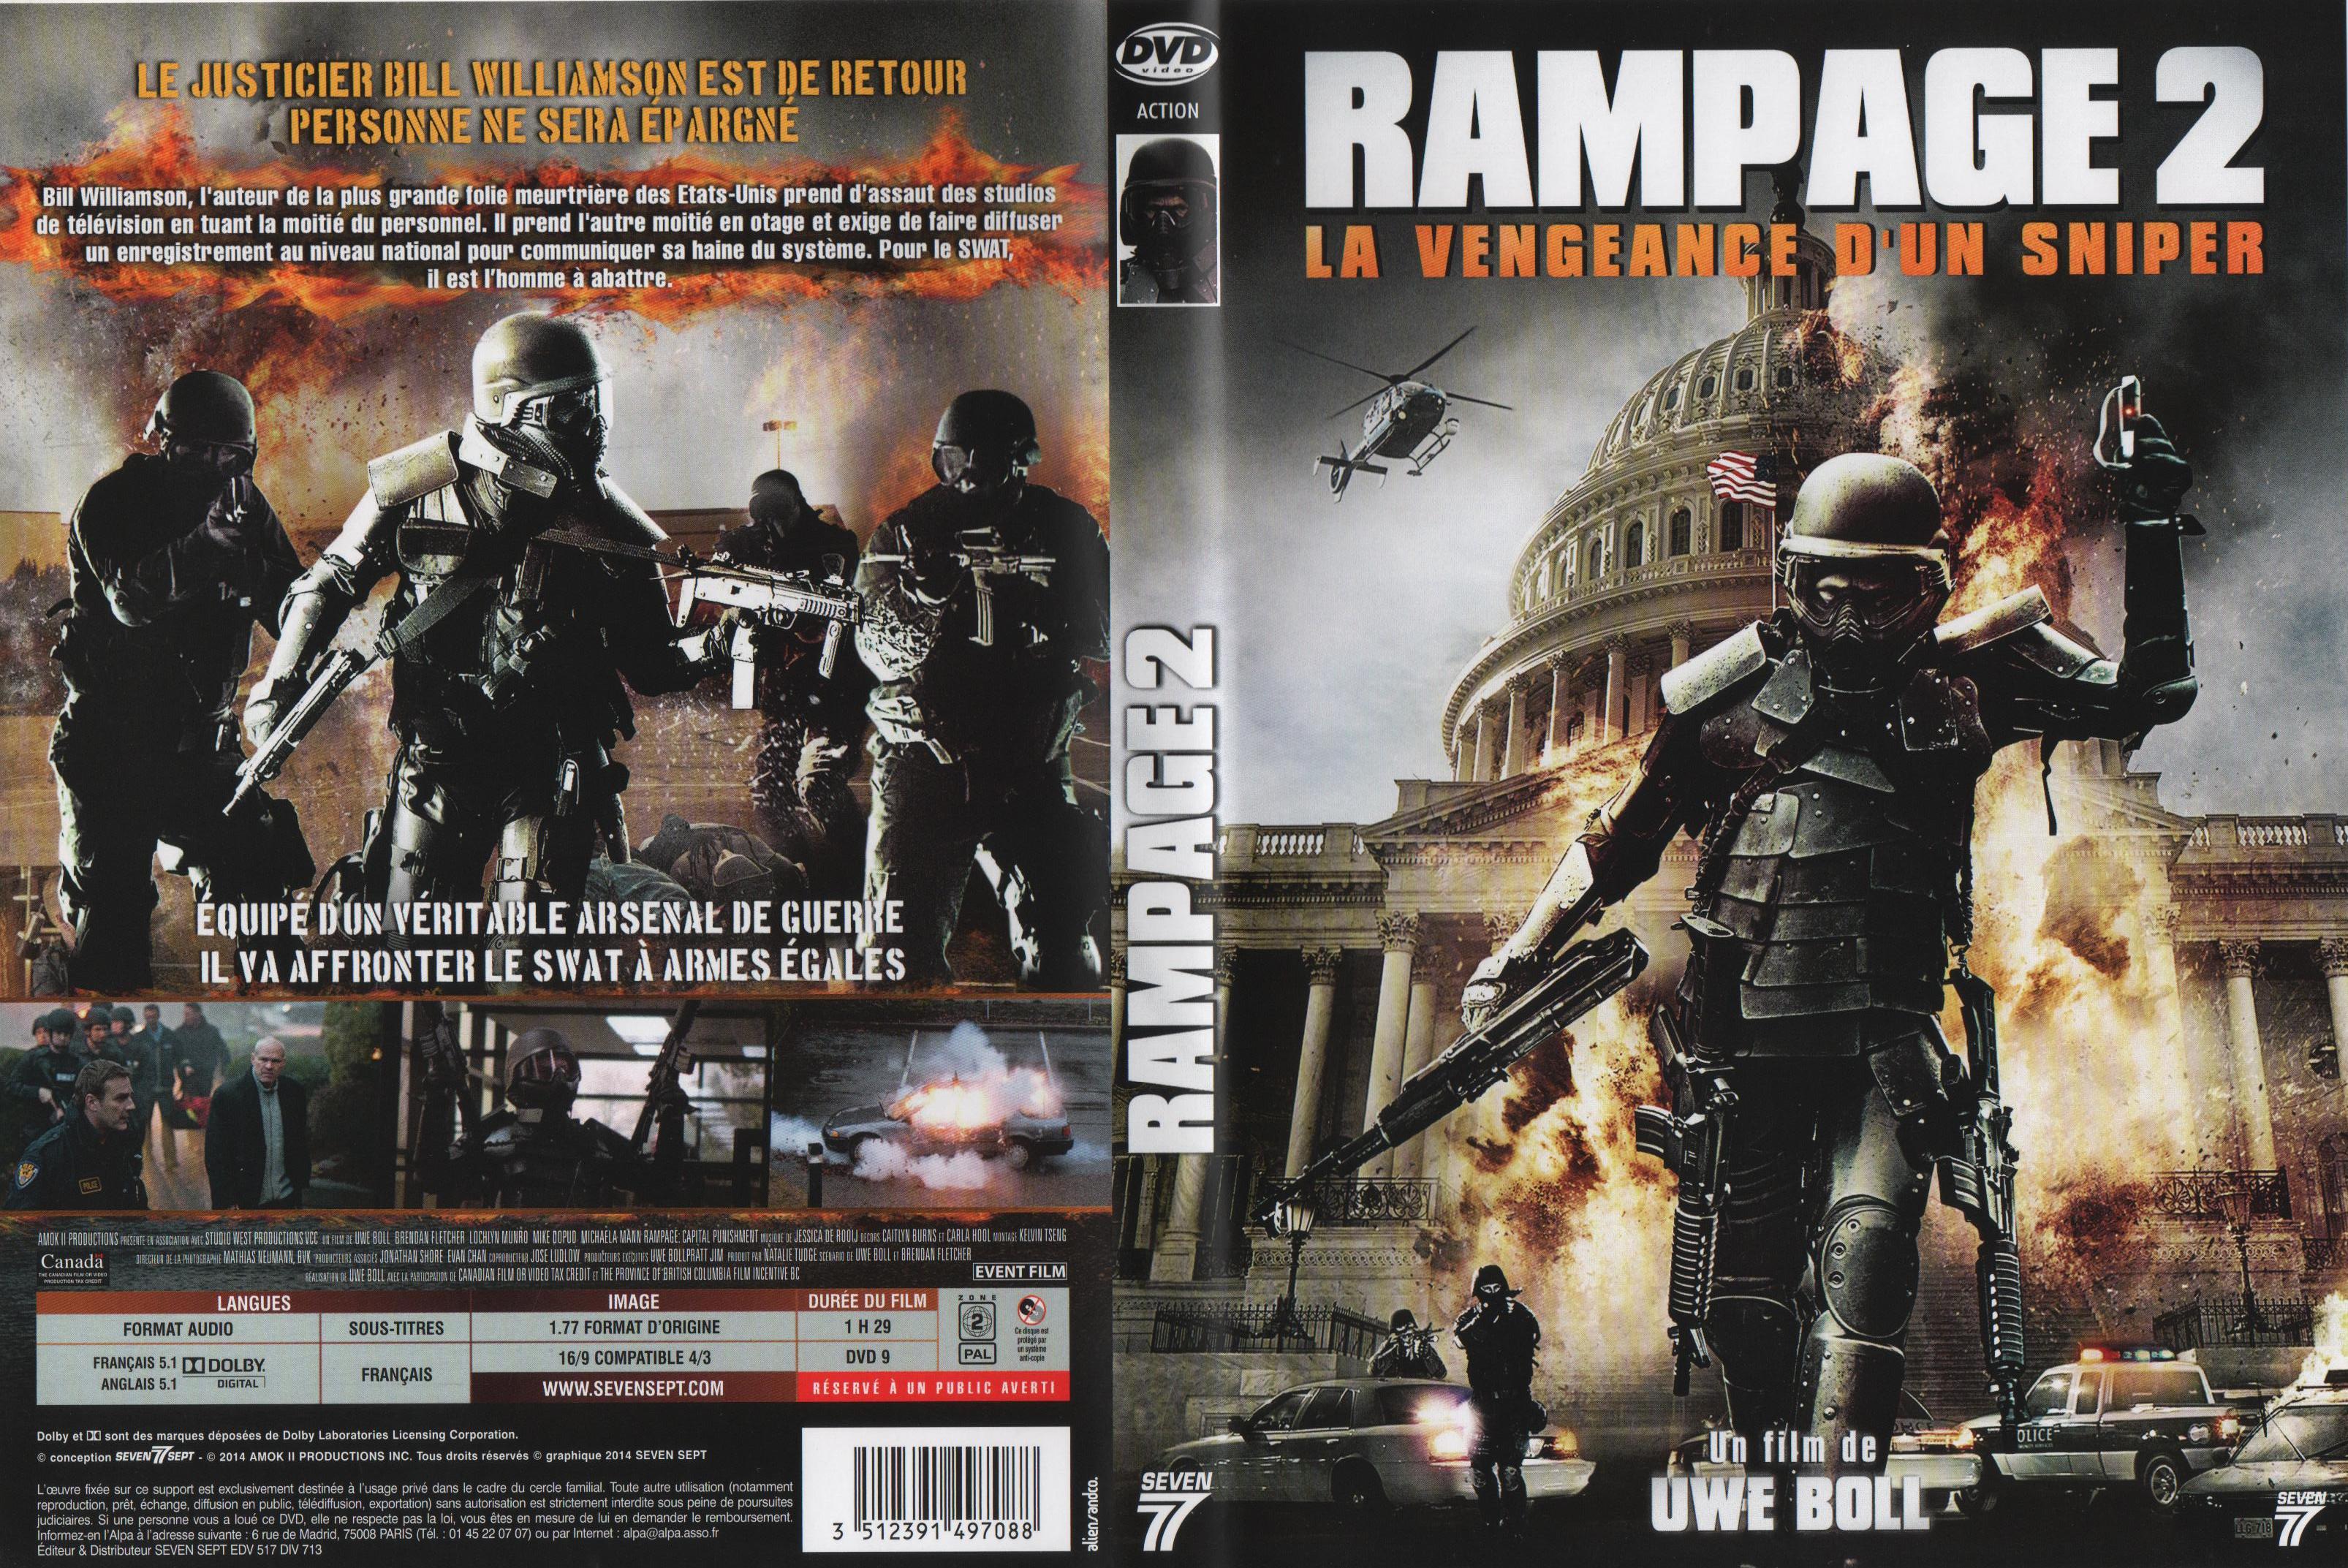 Jaquette DVD Rampage 2